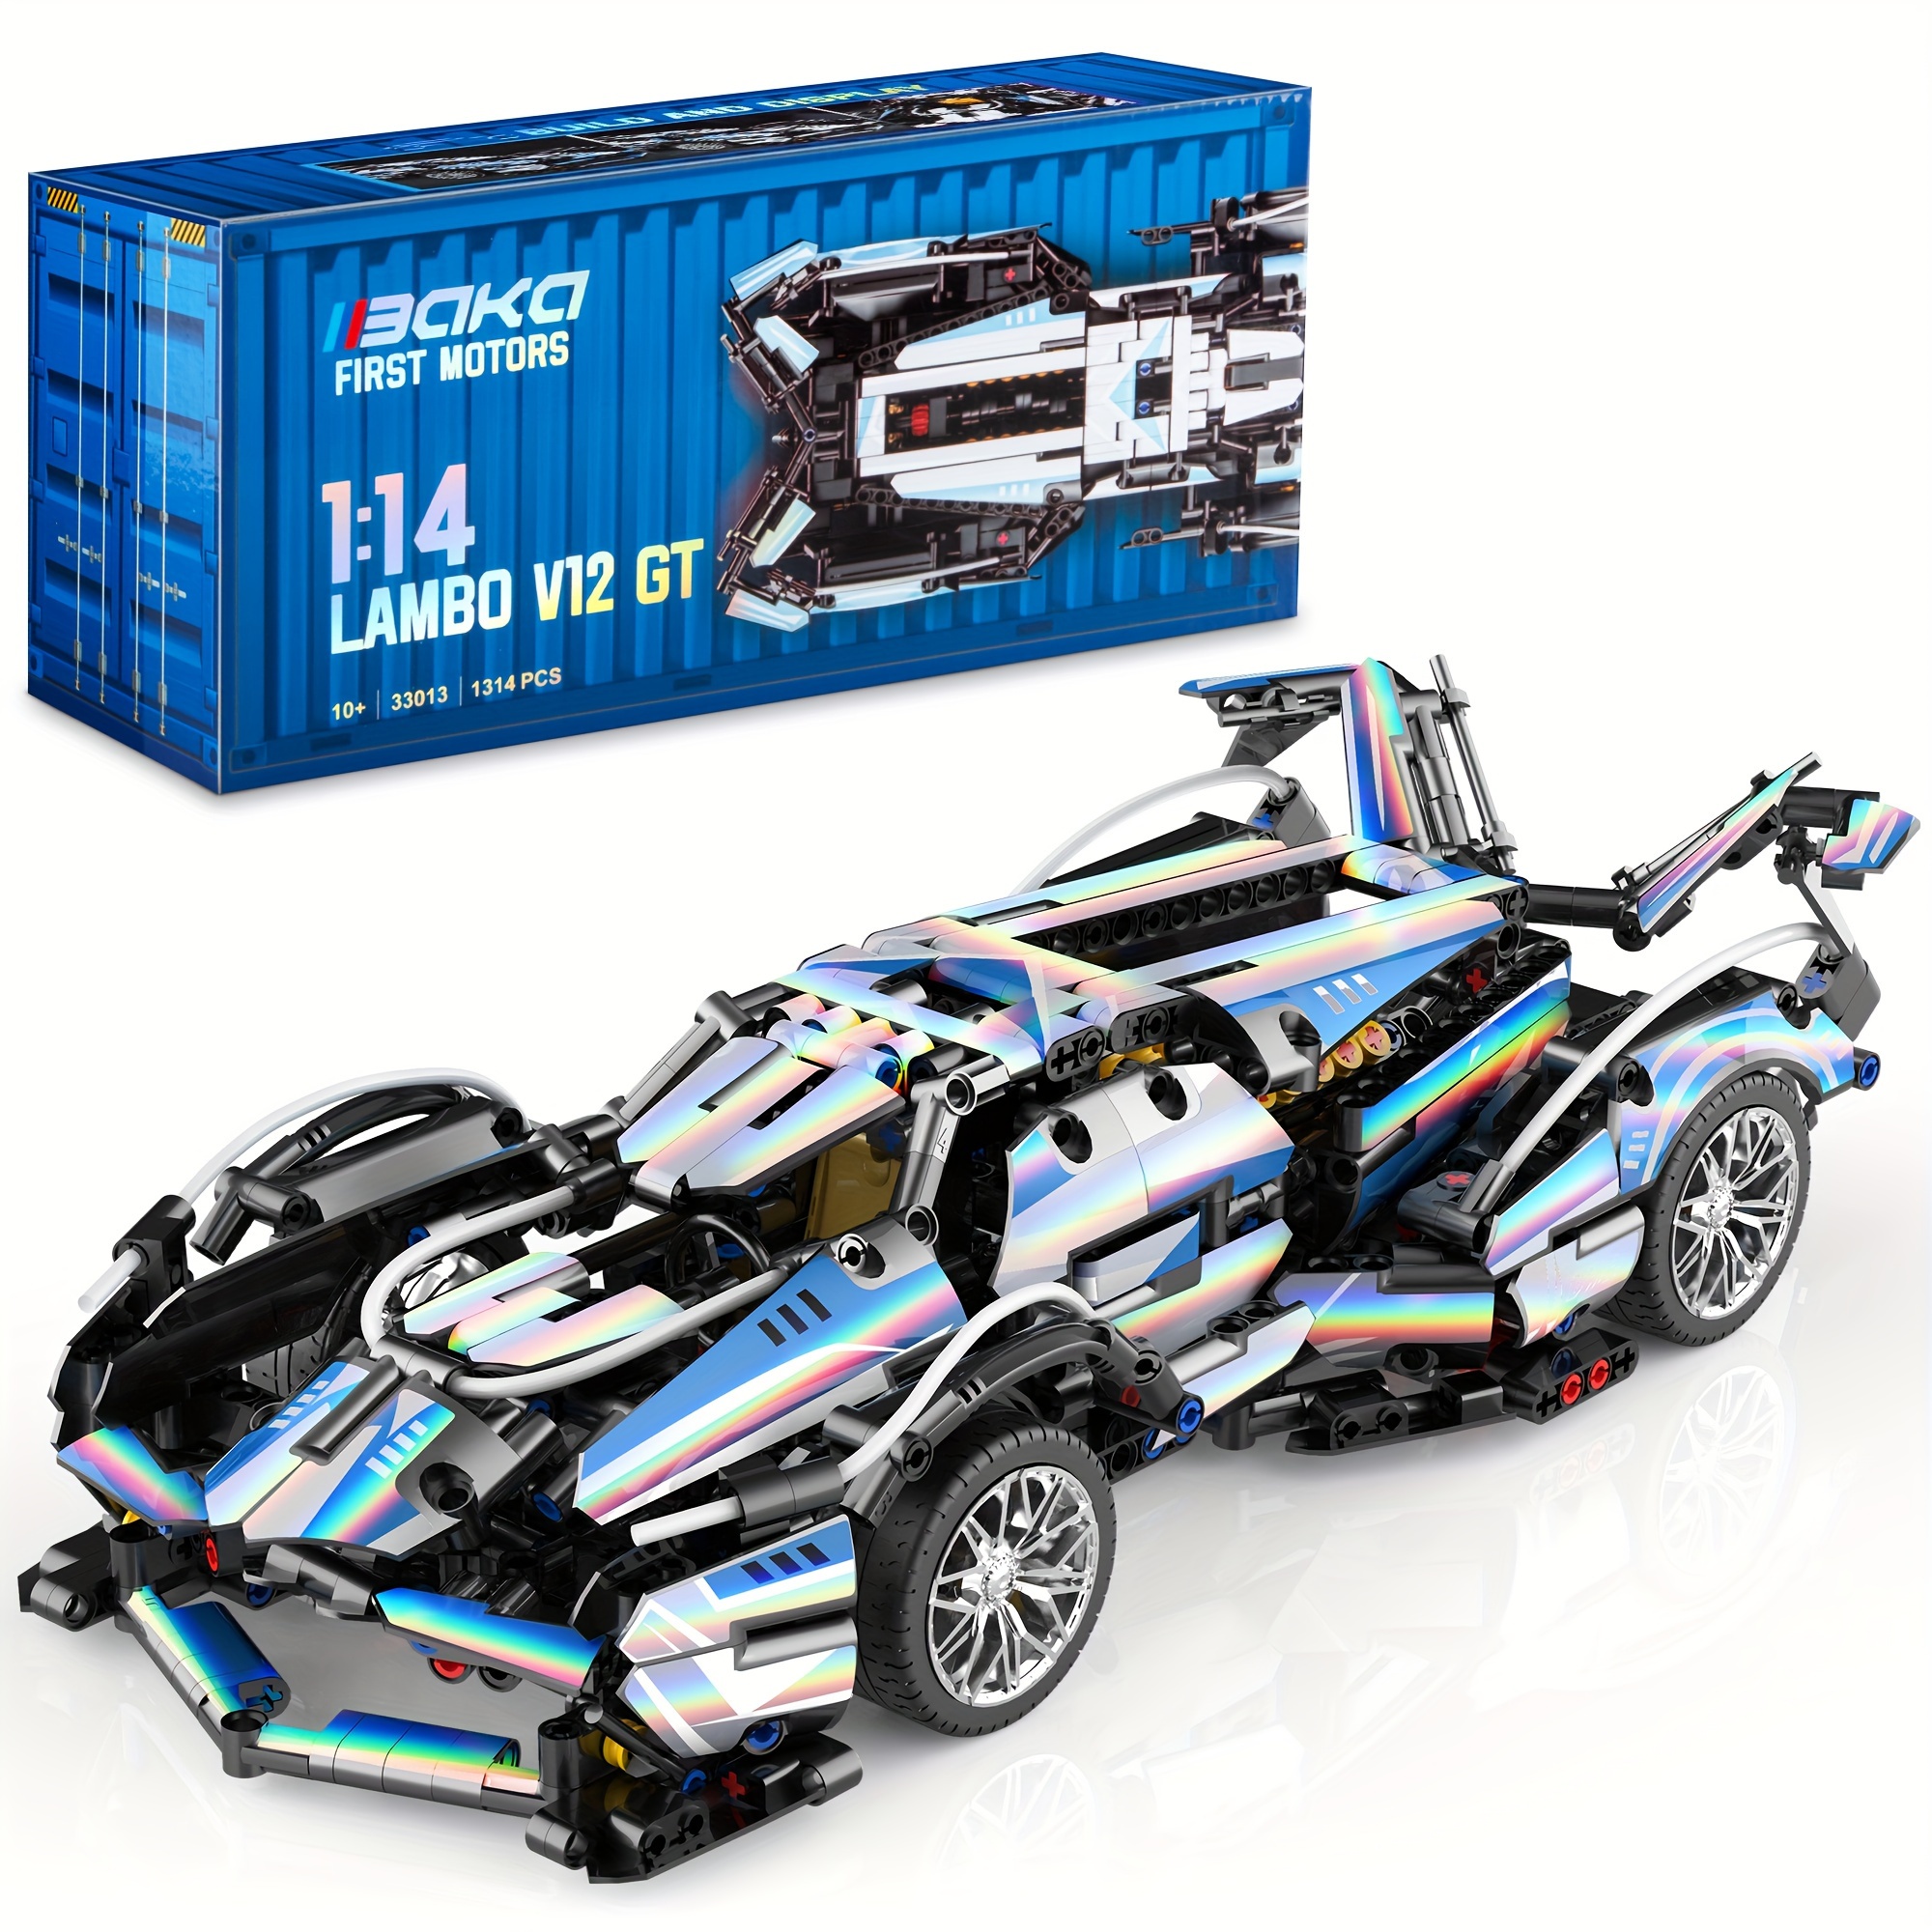 

Baka Cars Toys Building Set For Boys Aged 10+ - 1:14 V12 Building Car Toy For Back To School, 1314 Pieces Sports Car Toys For Kids, Teens And Adults